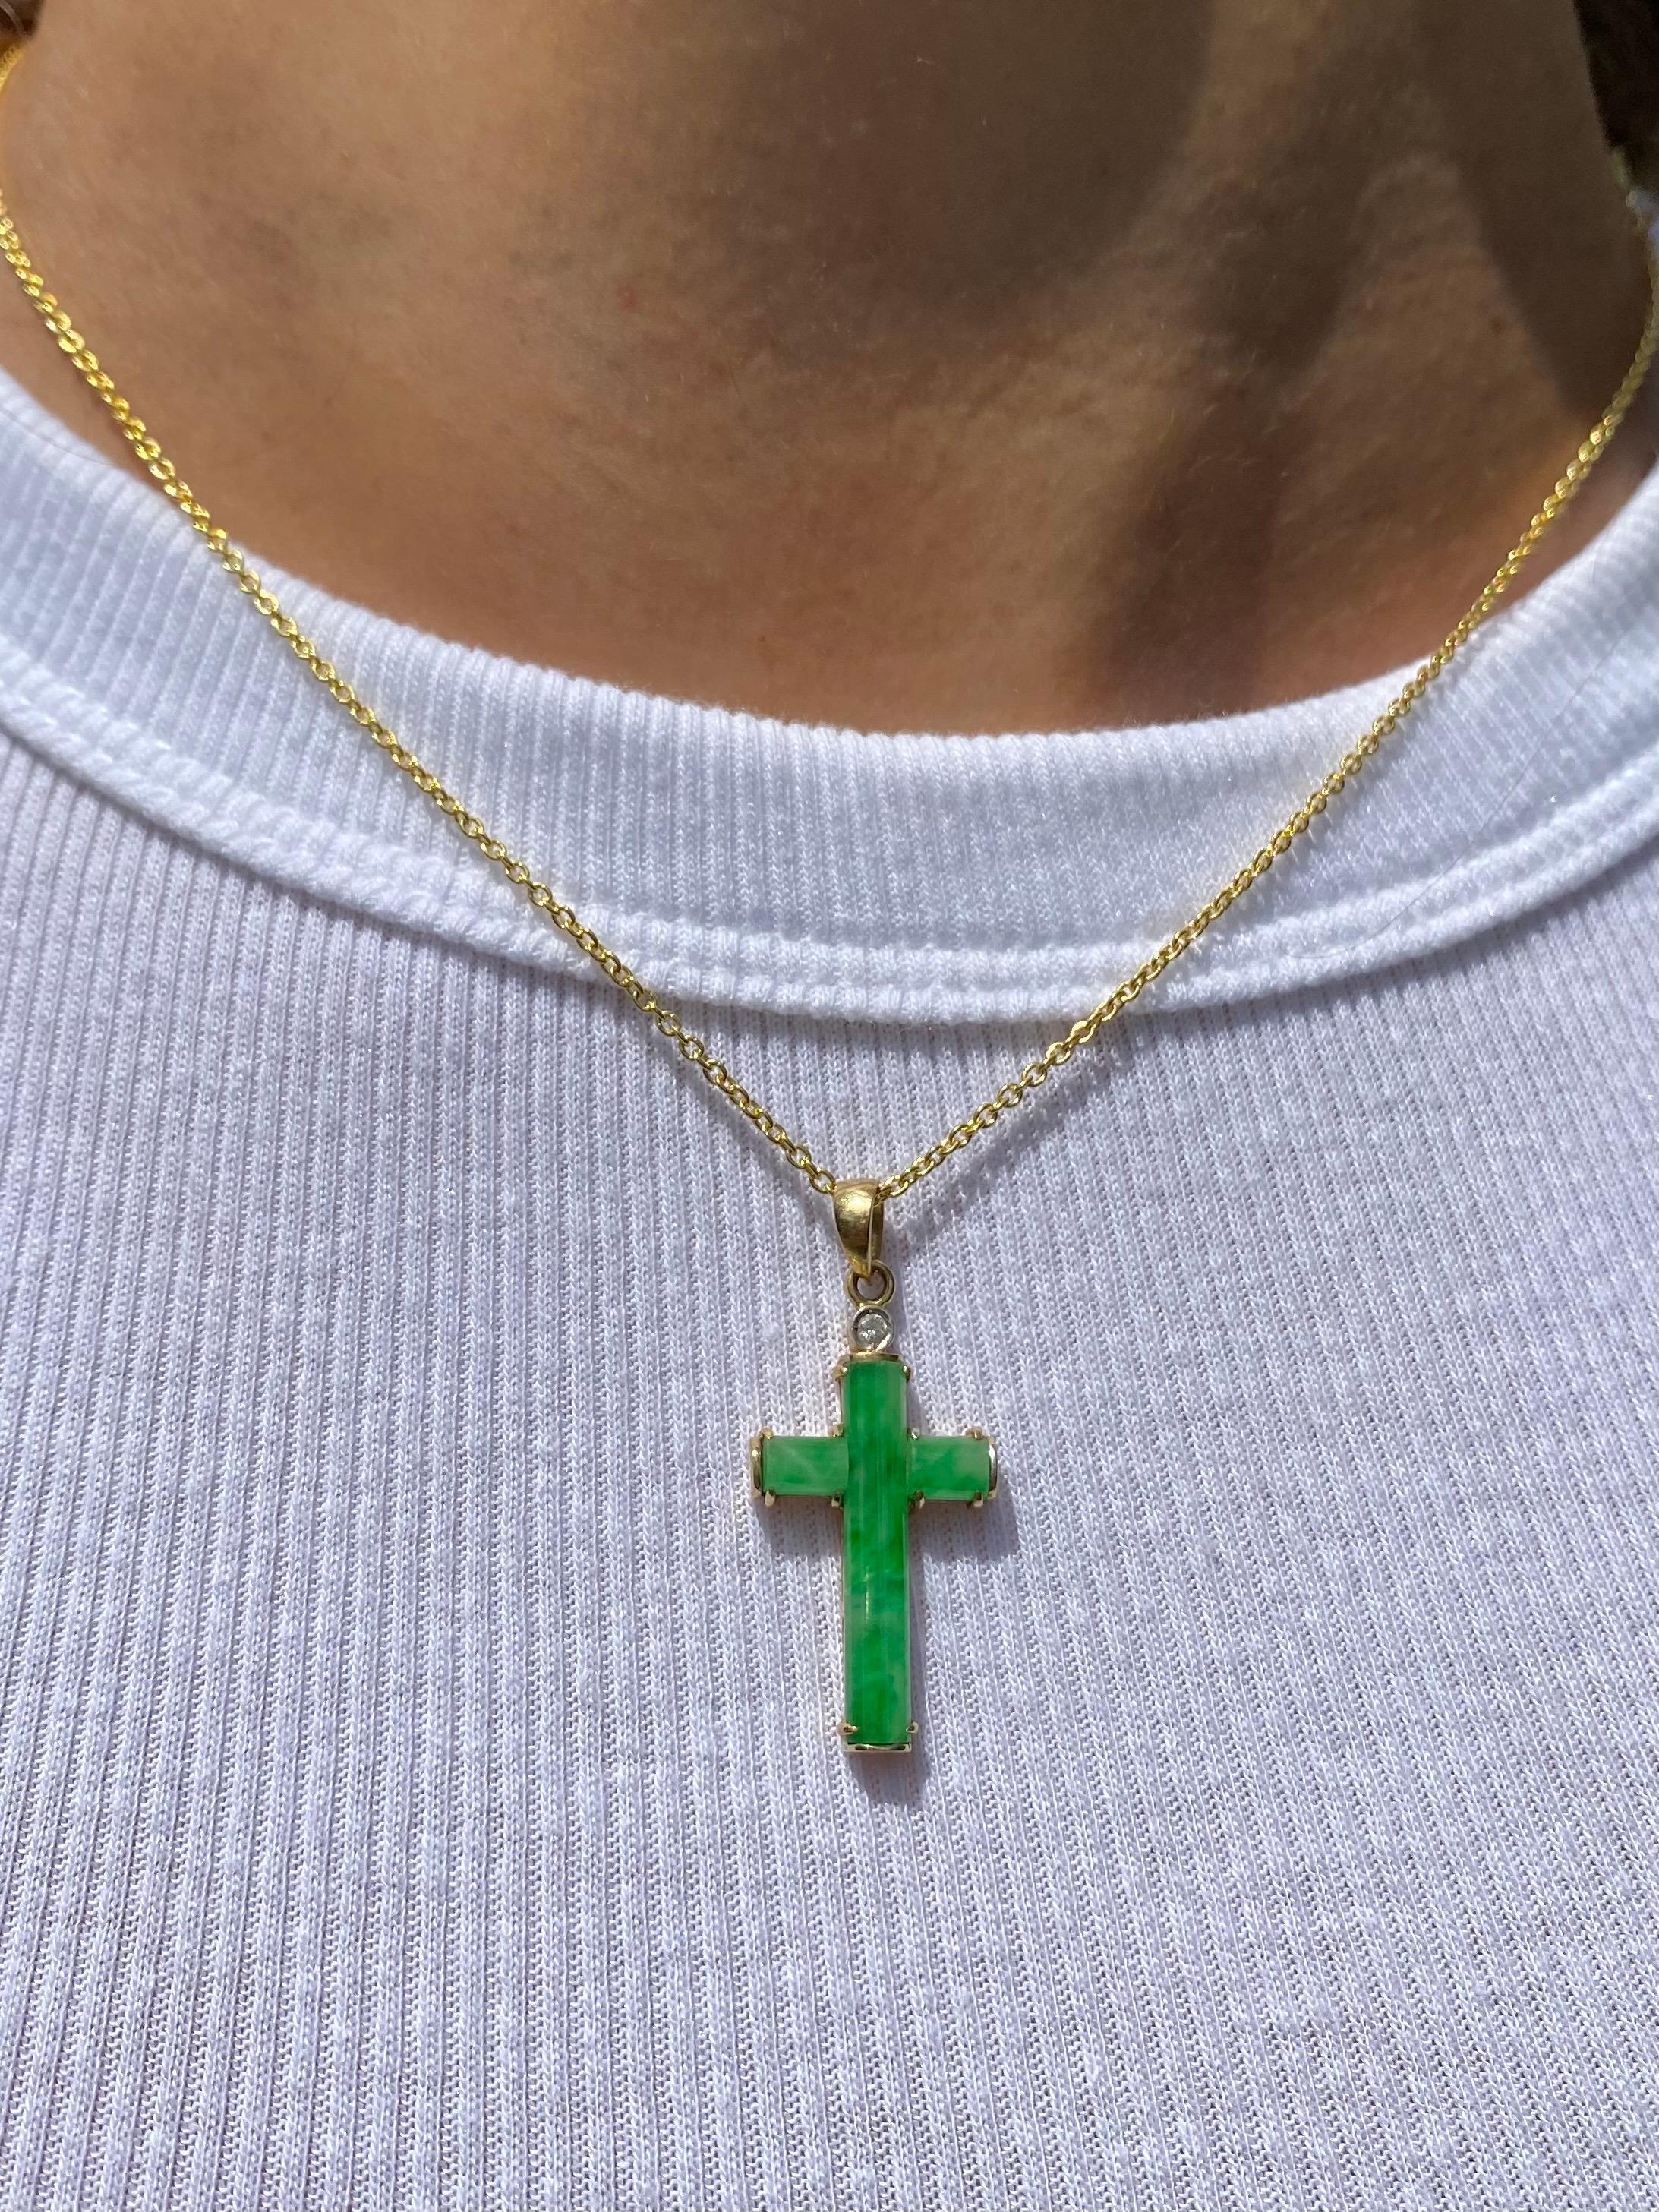 Cabochon Natural Jade Cross Pendant in 18k Solid Gold Setting with 14k Gold Cable Chain